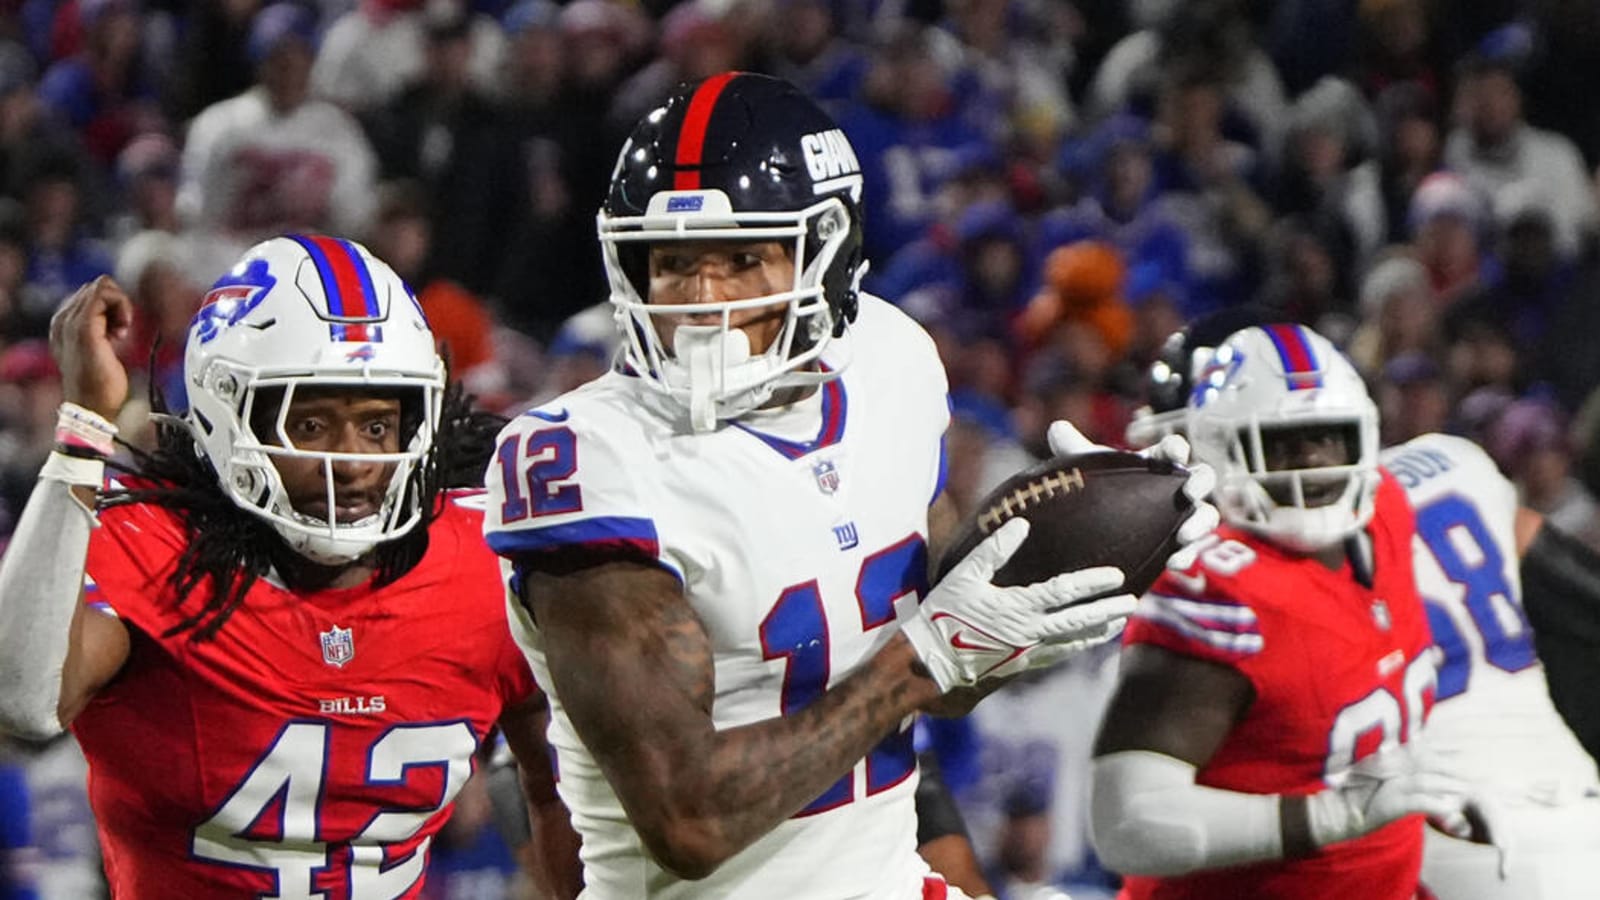 Bills beat Giants after controversial final play in end zone